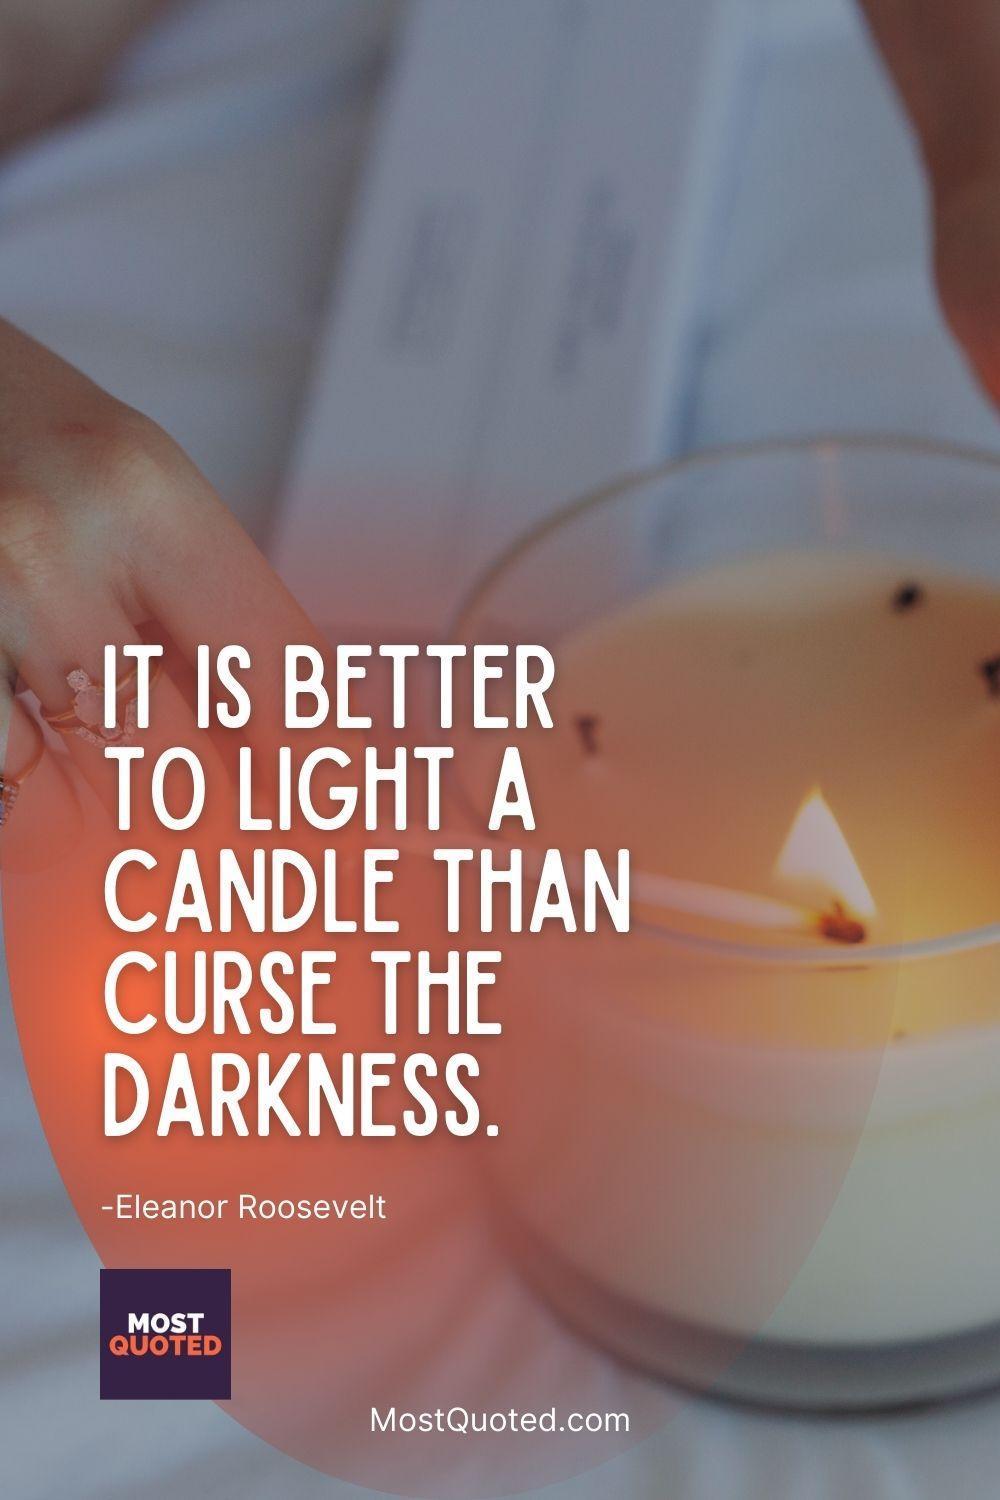 It is better to light a candle than curse the darkness. - Eleanor Roosevelt